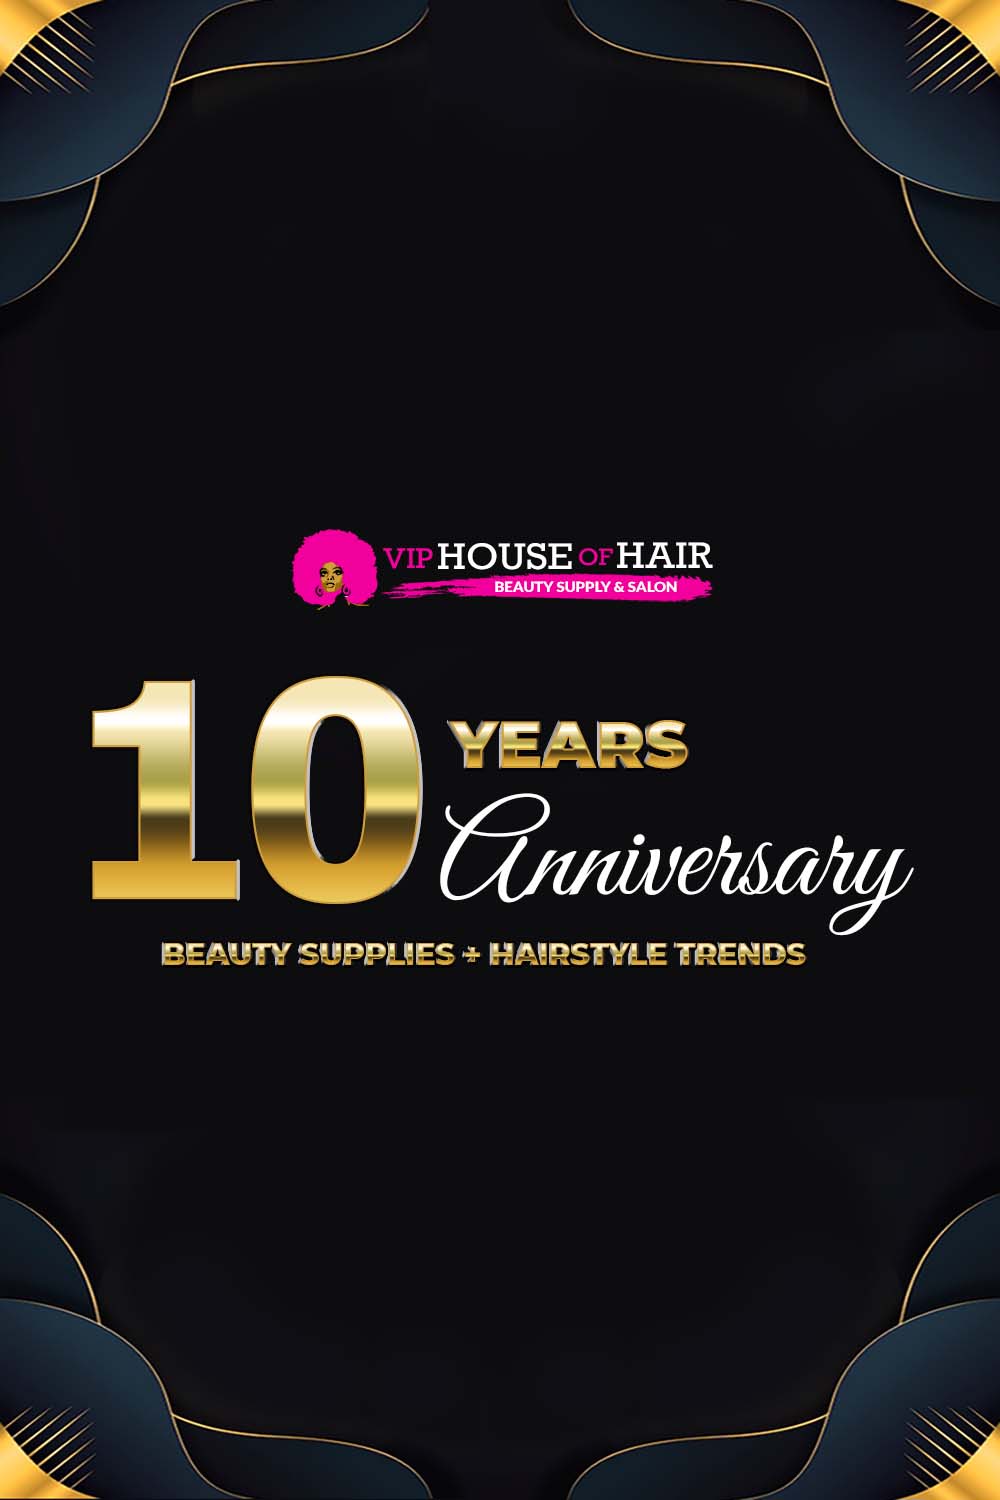 Celebrating 10 Years In Beauty and Hairstyle Trends